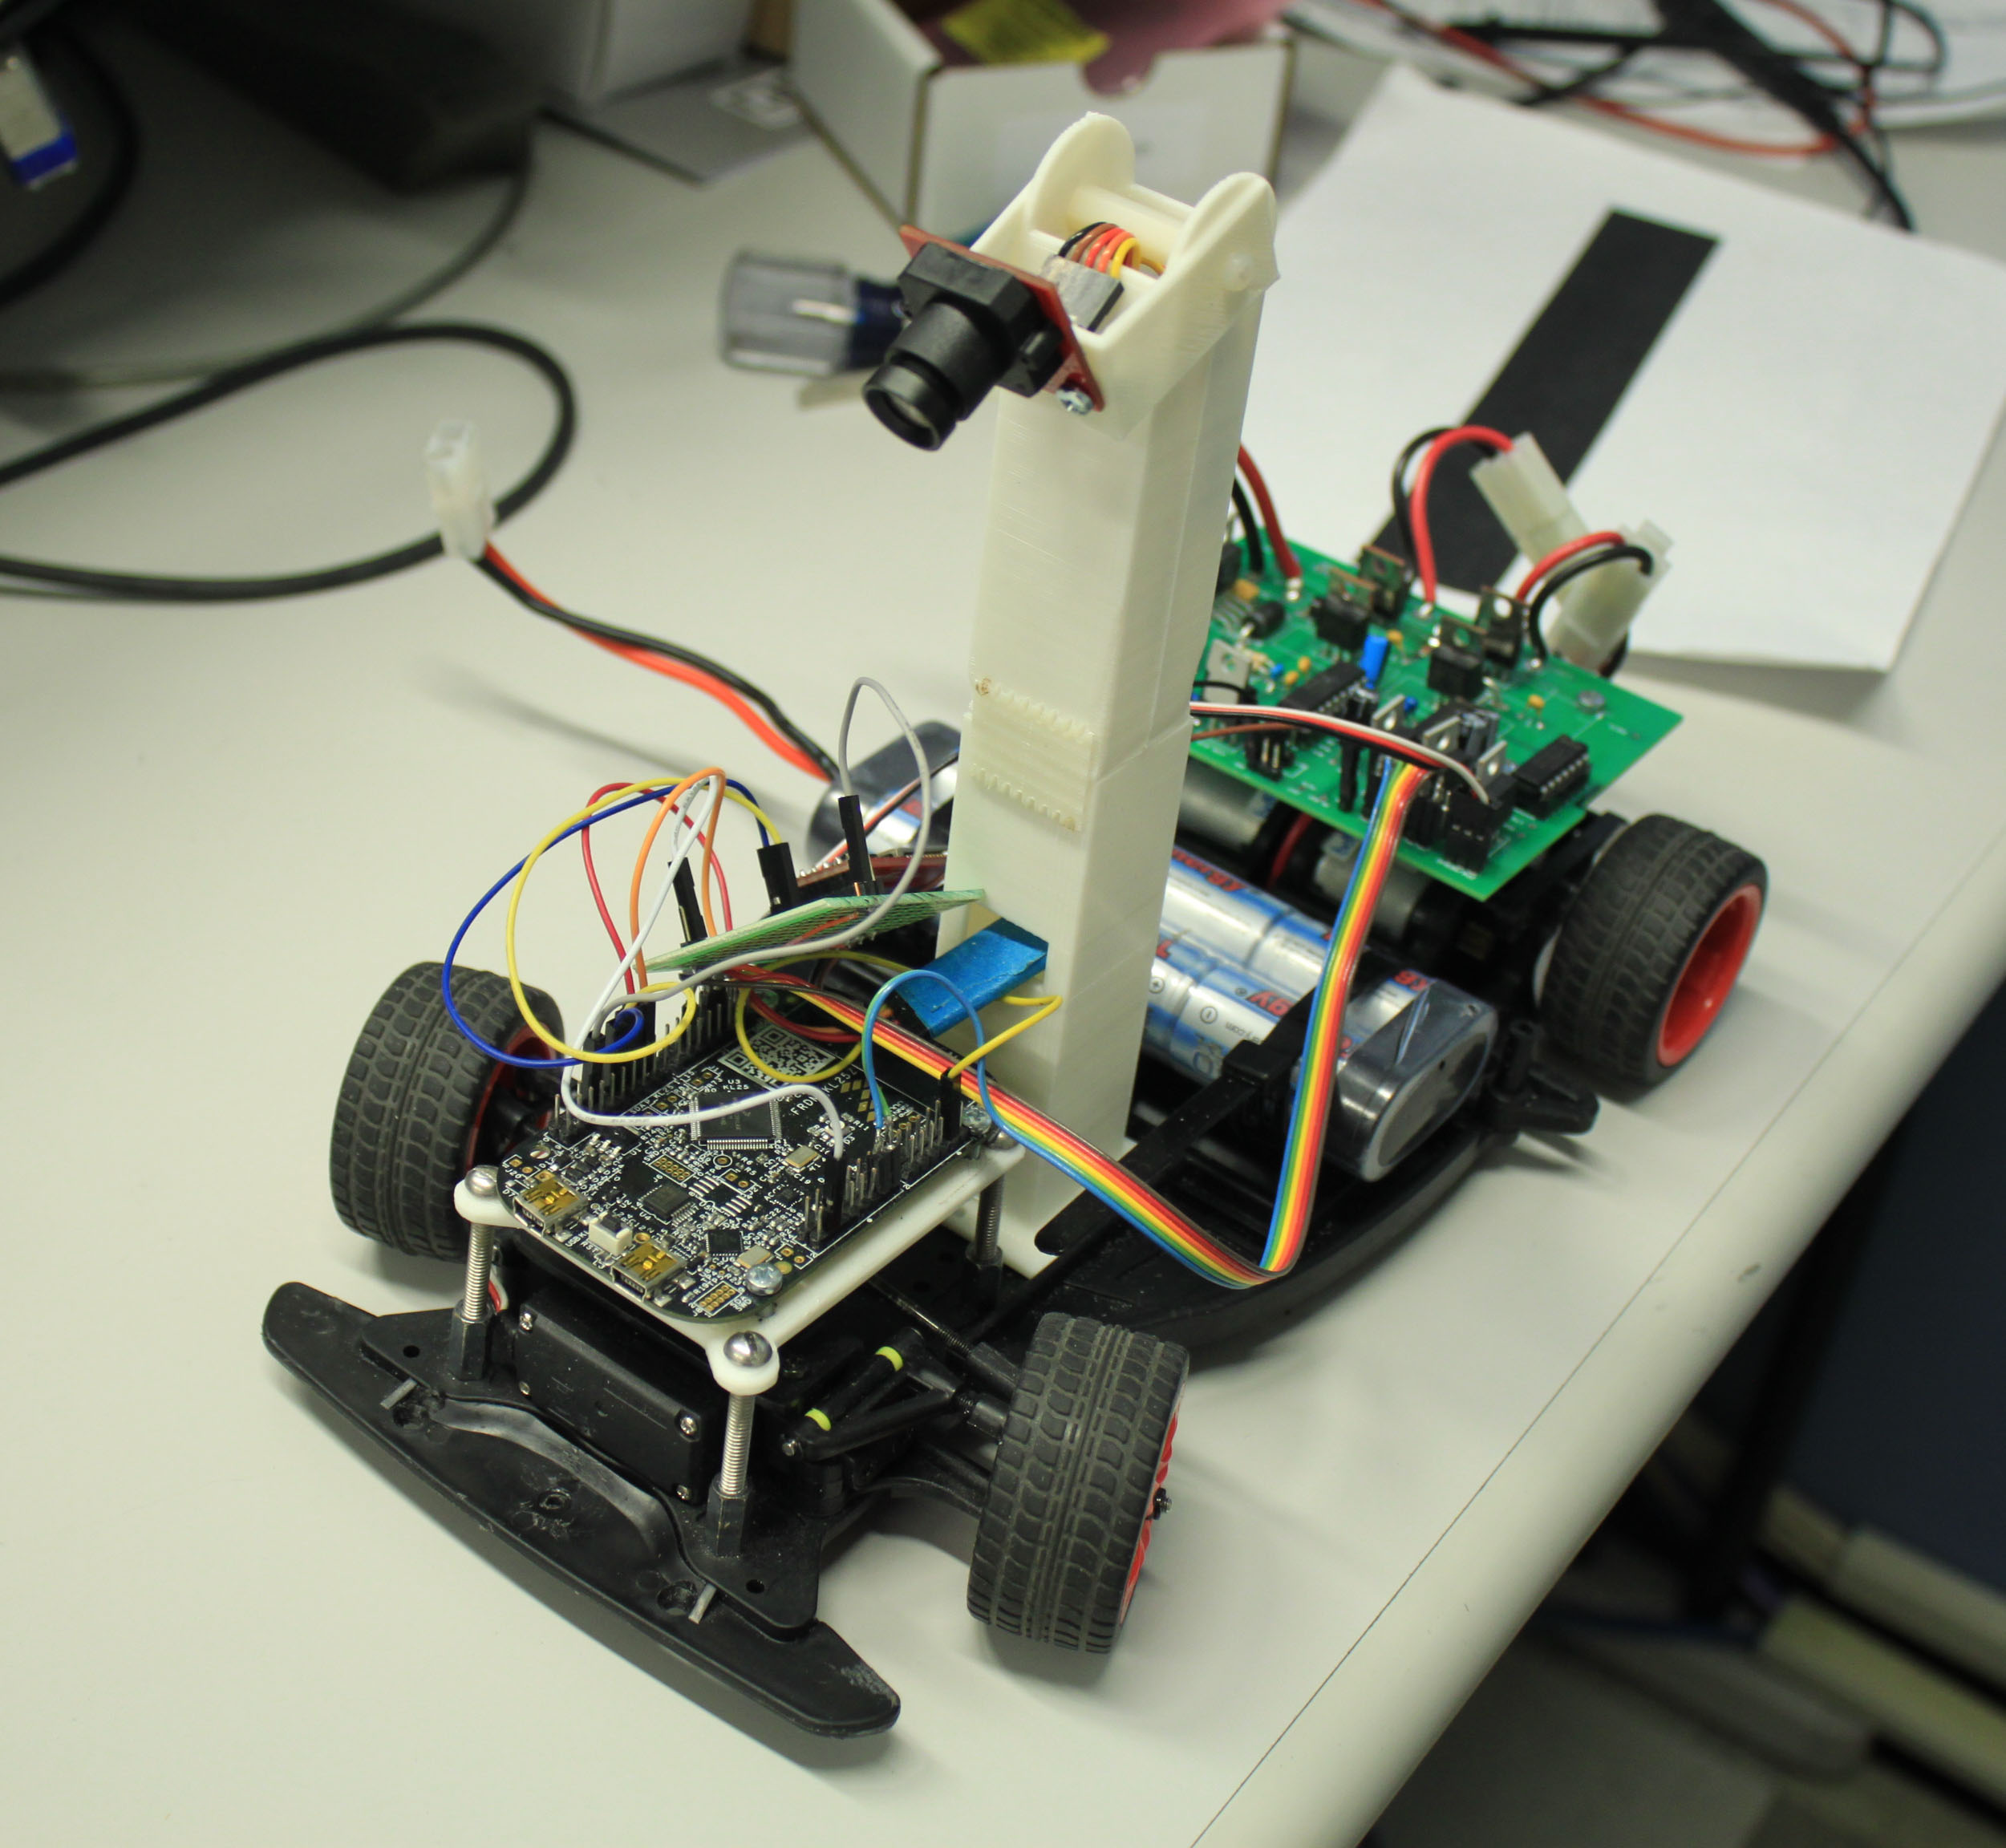 An RC car with custom electronics and a camera mounted on a mast.